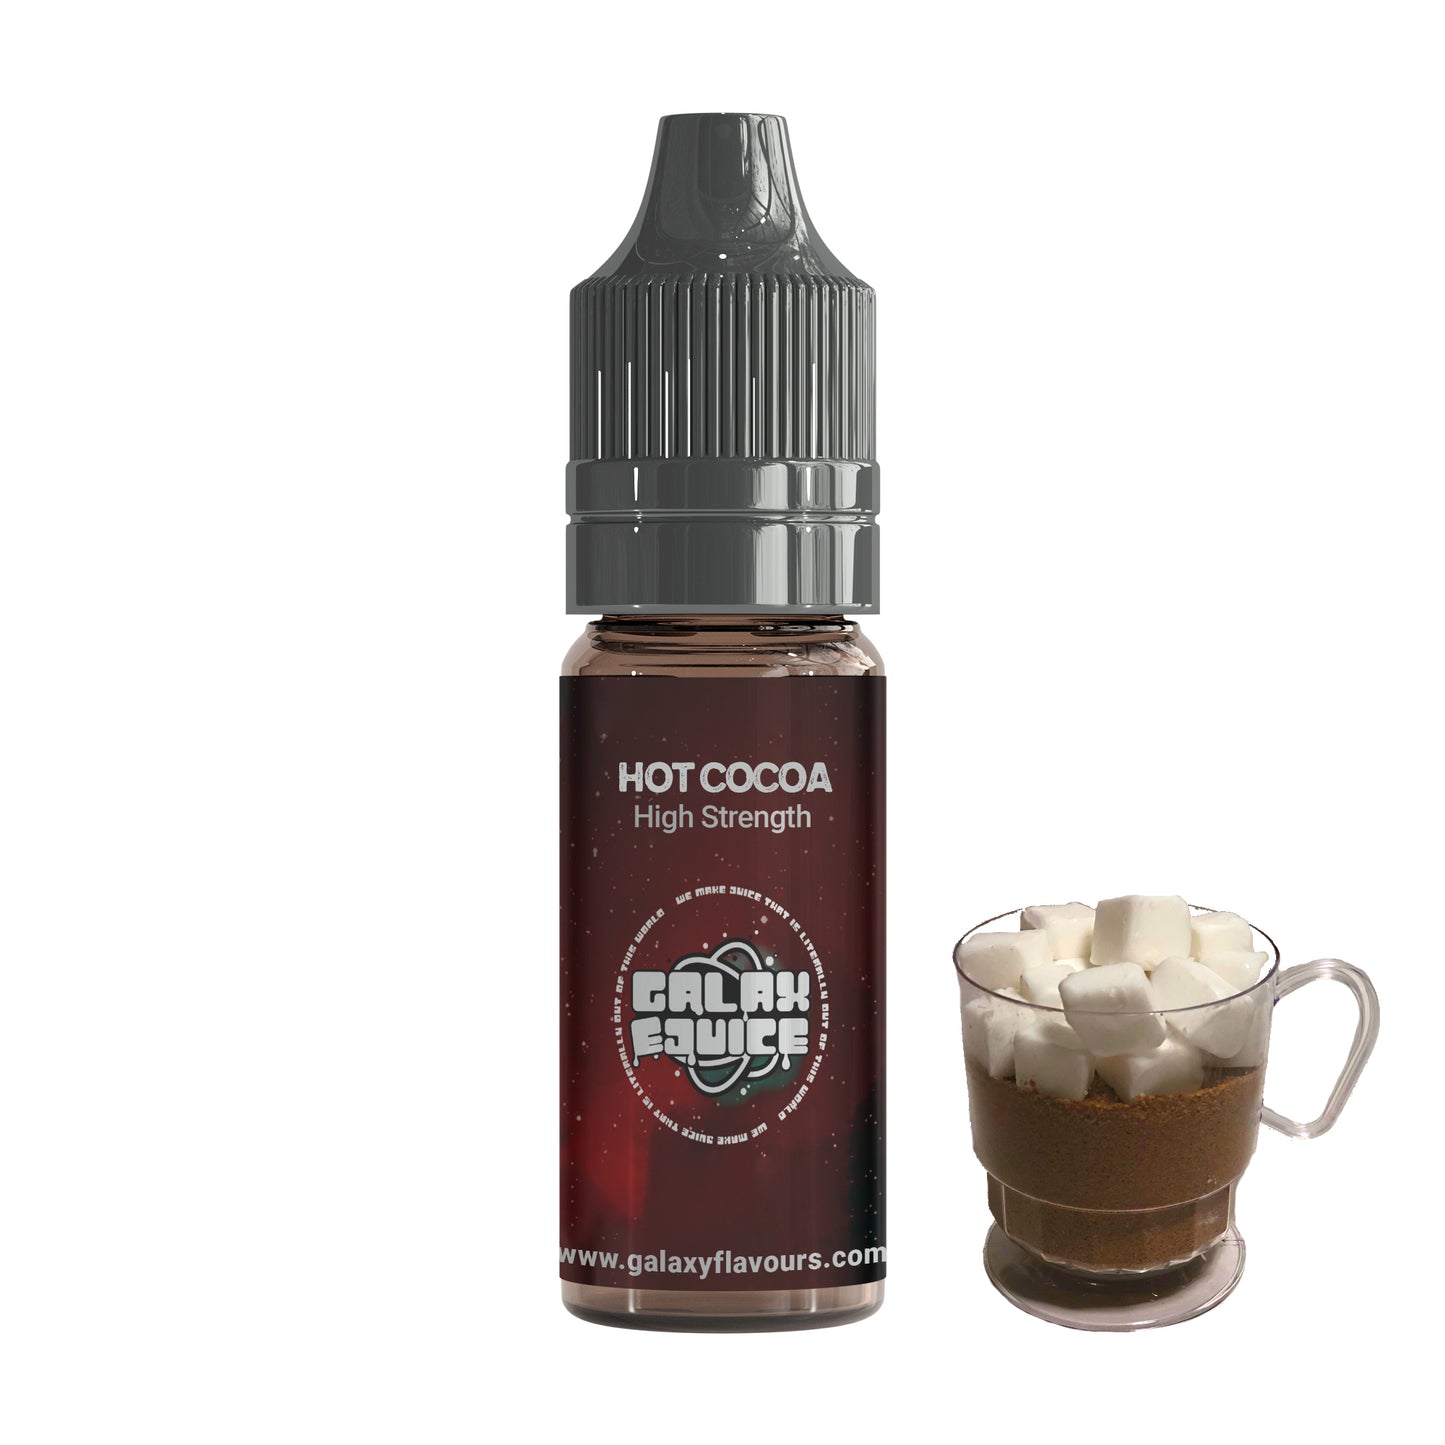 Hot Cocoa High Strength Professional Flavouring.